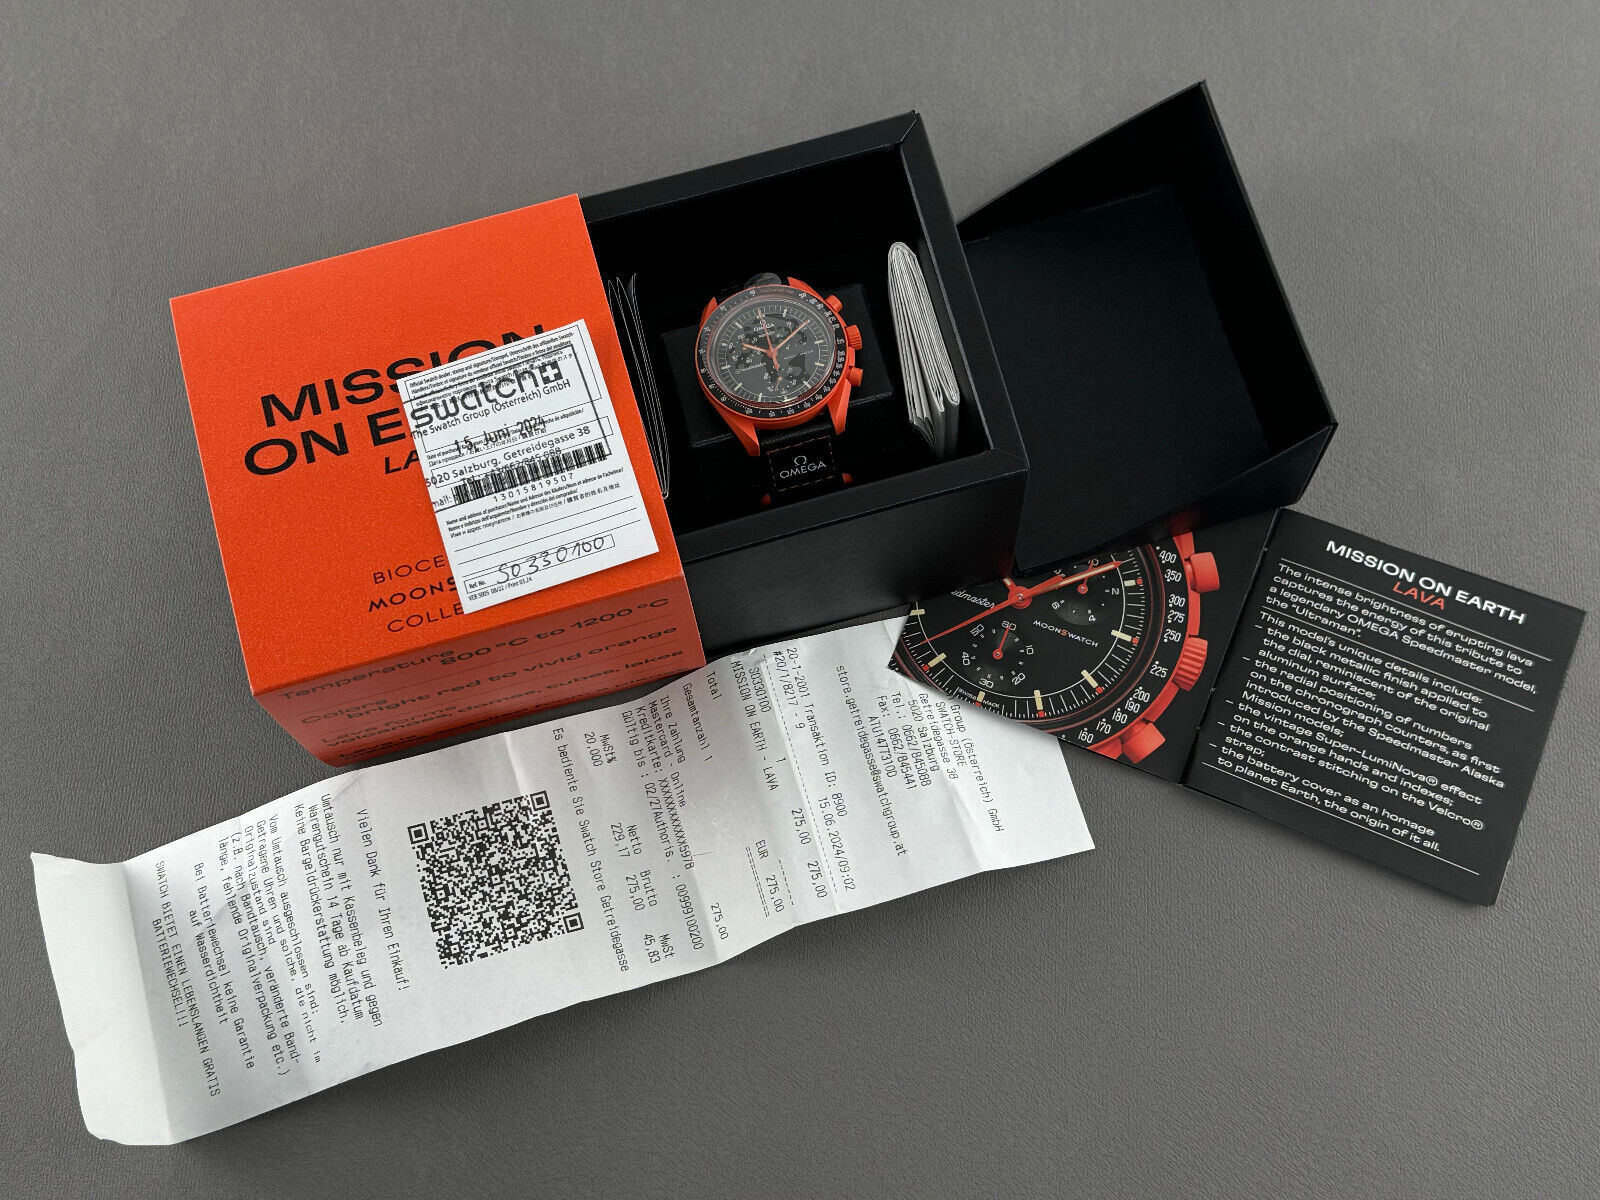  Omega x Swatch Speedmaster MoonSwatch Mission on Earth Lava Uhr watch SO33O100